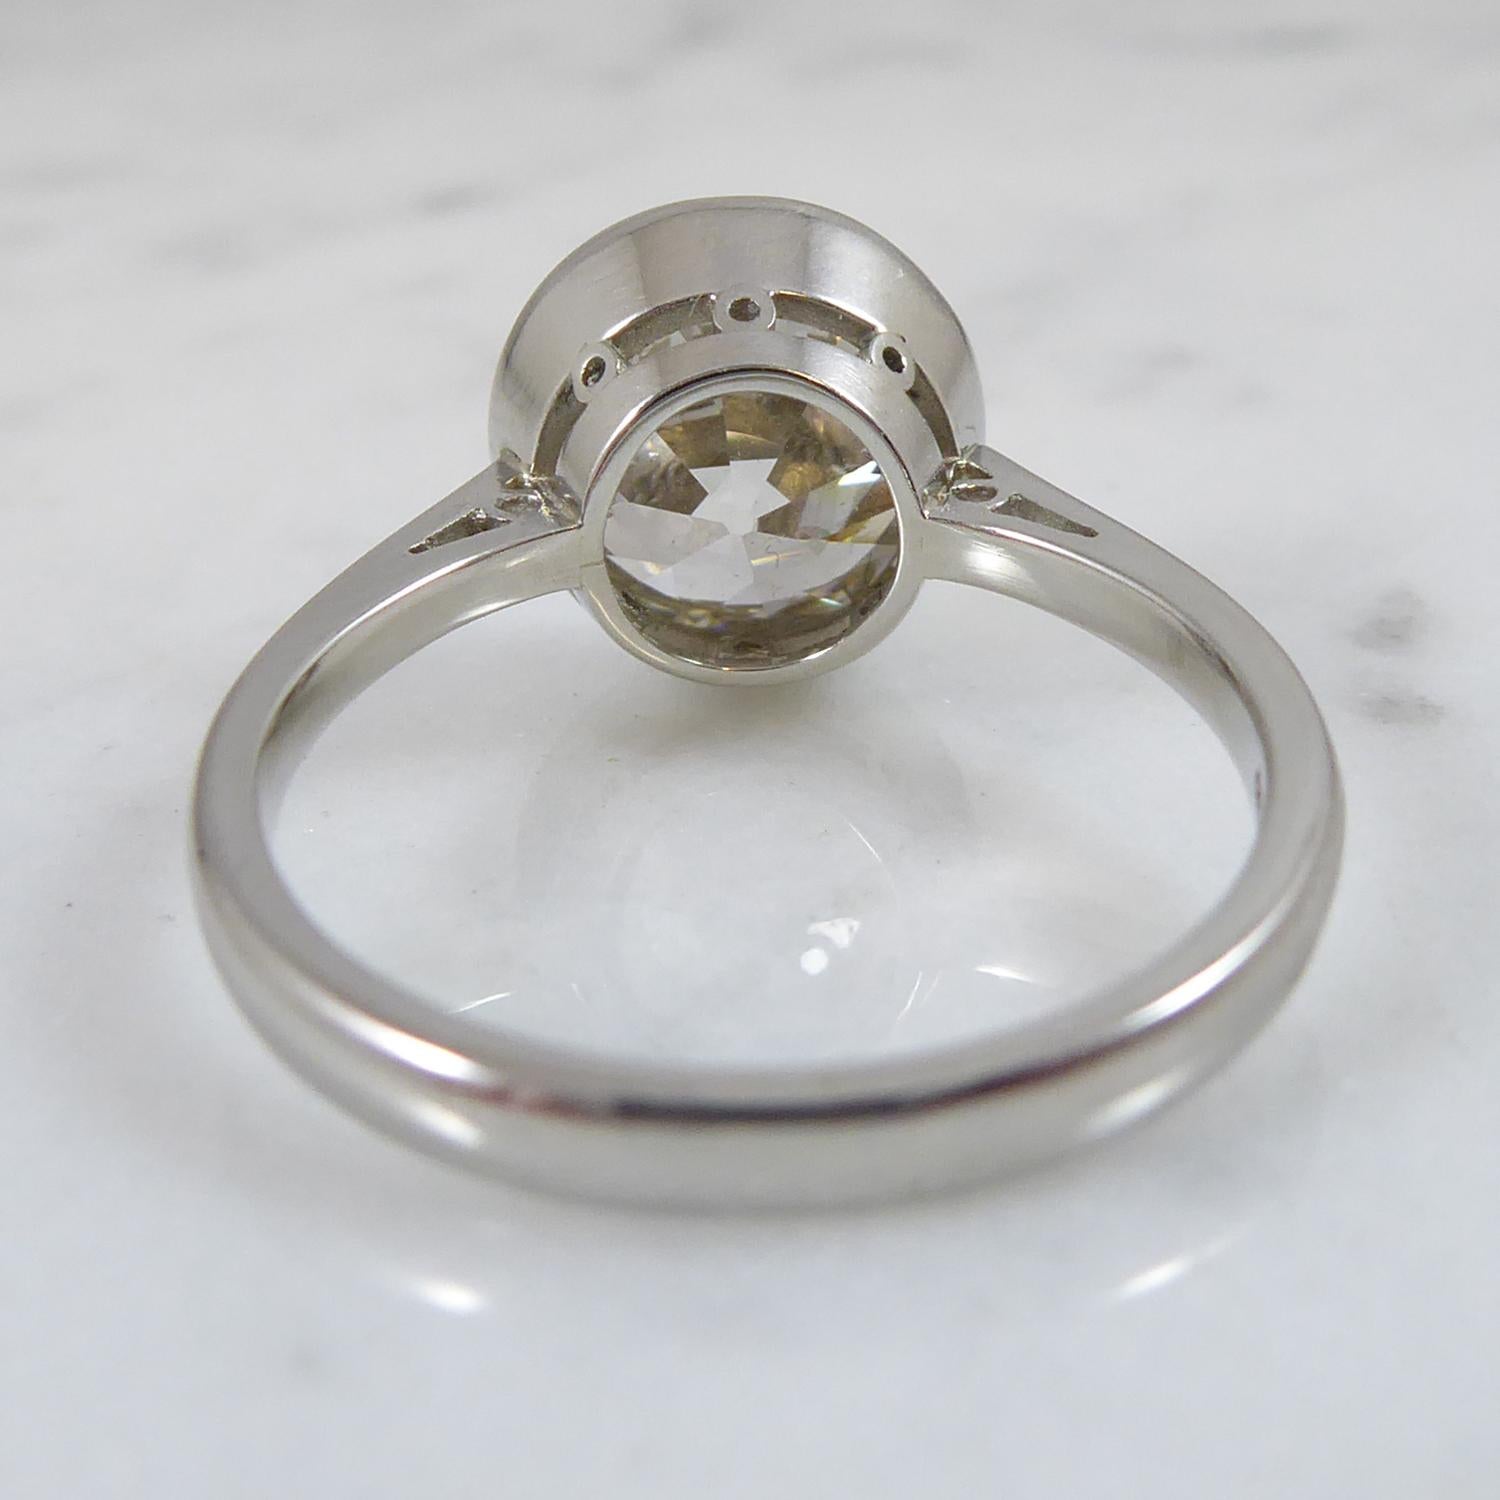 3.39 Carat Old European Cut Diamond Solitaire Ring, Platinum In Good Condition In Yorkshire, West Yorkshire